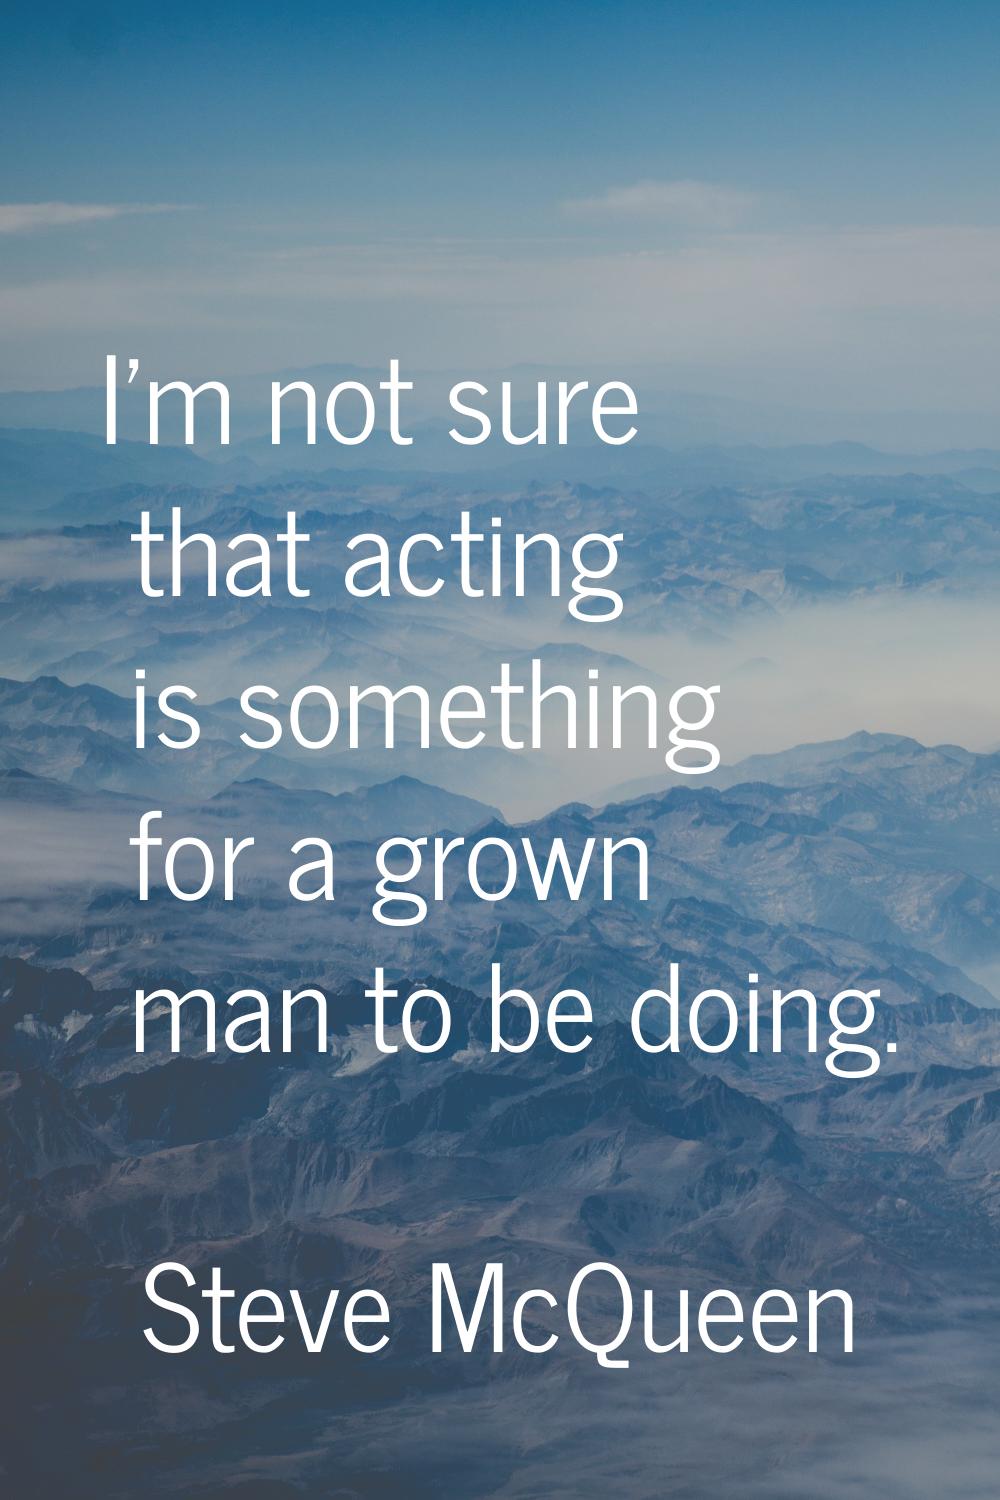 I'm not sure that acting is something for a grown man to be doing.